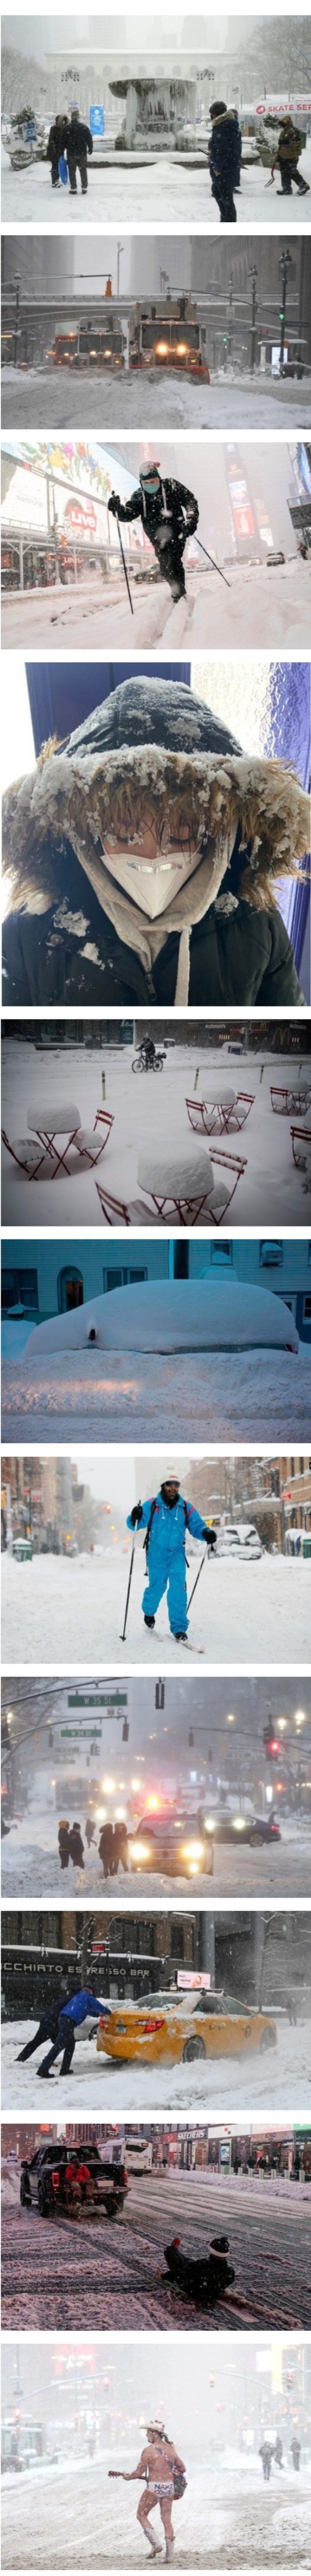 New York Suffering from Heavy Snow